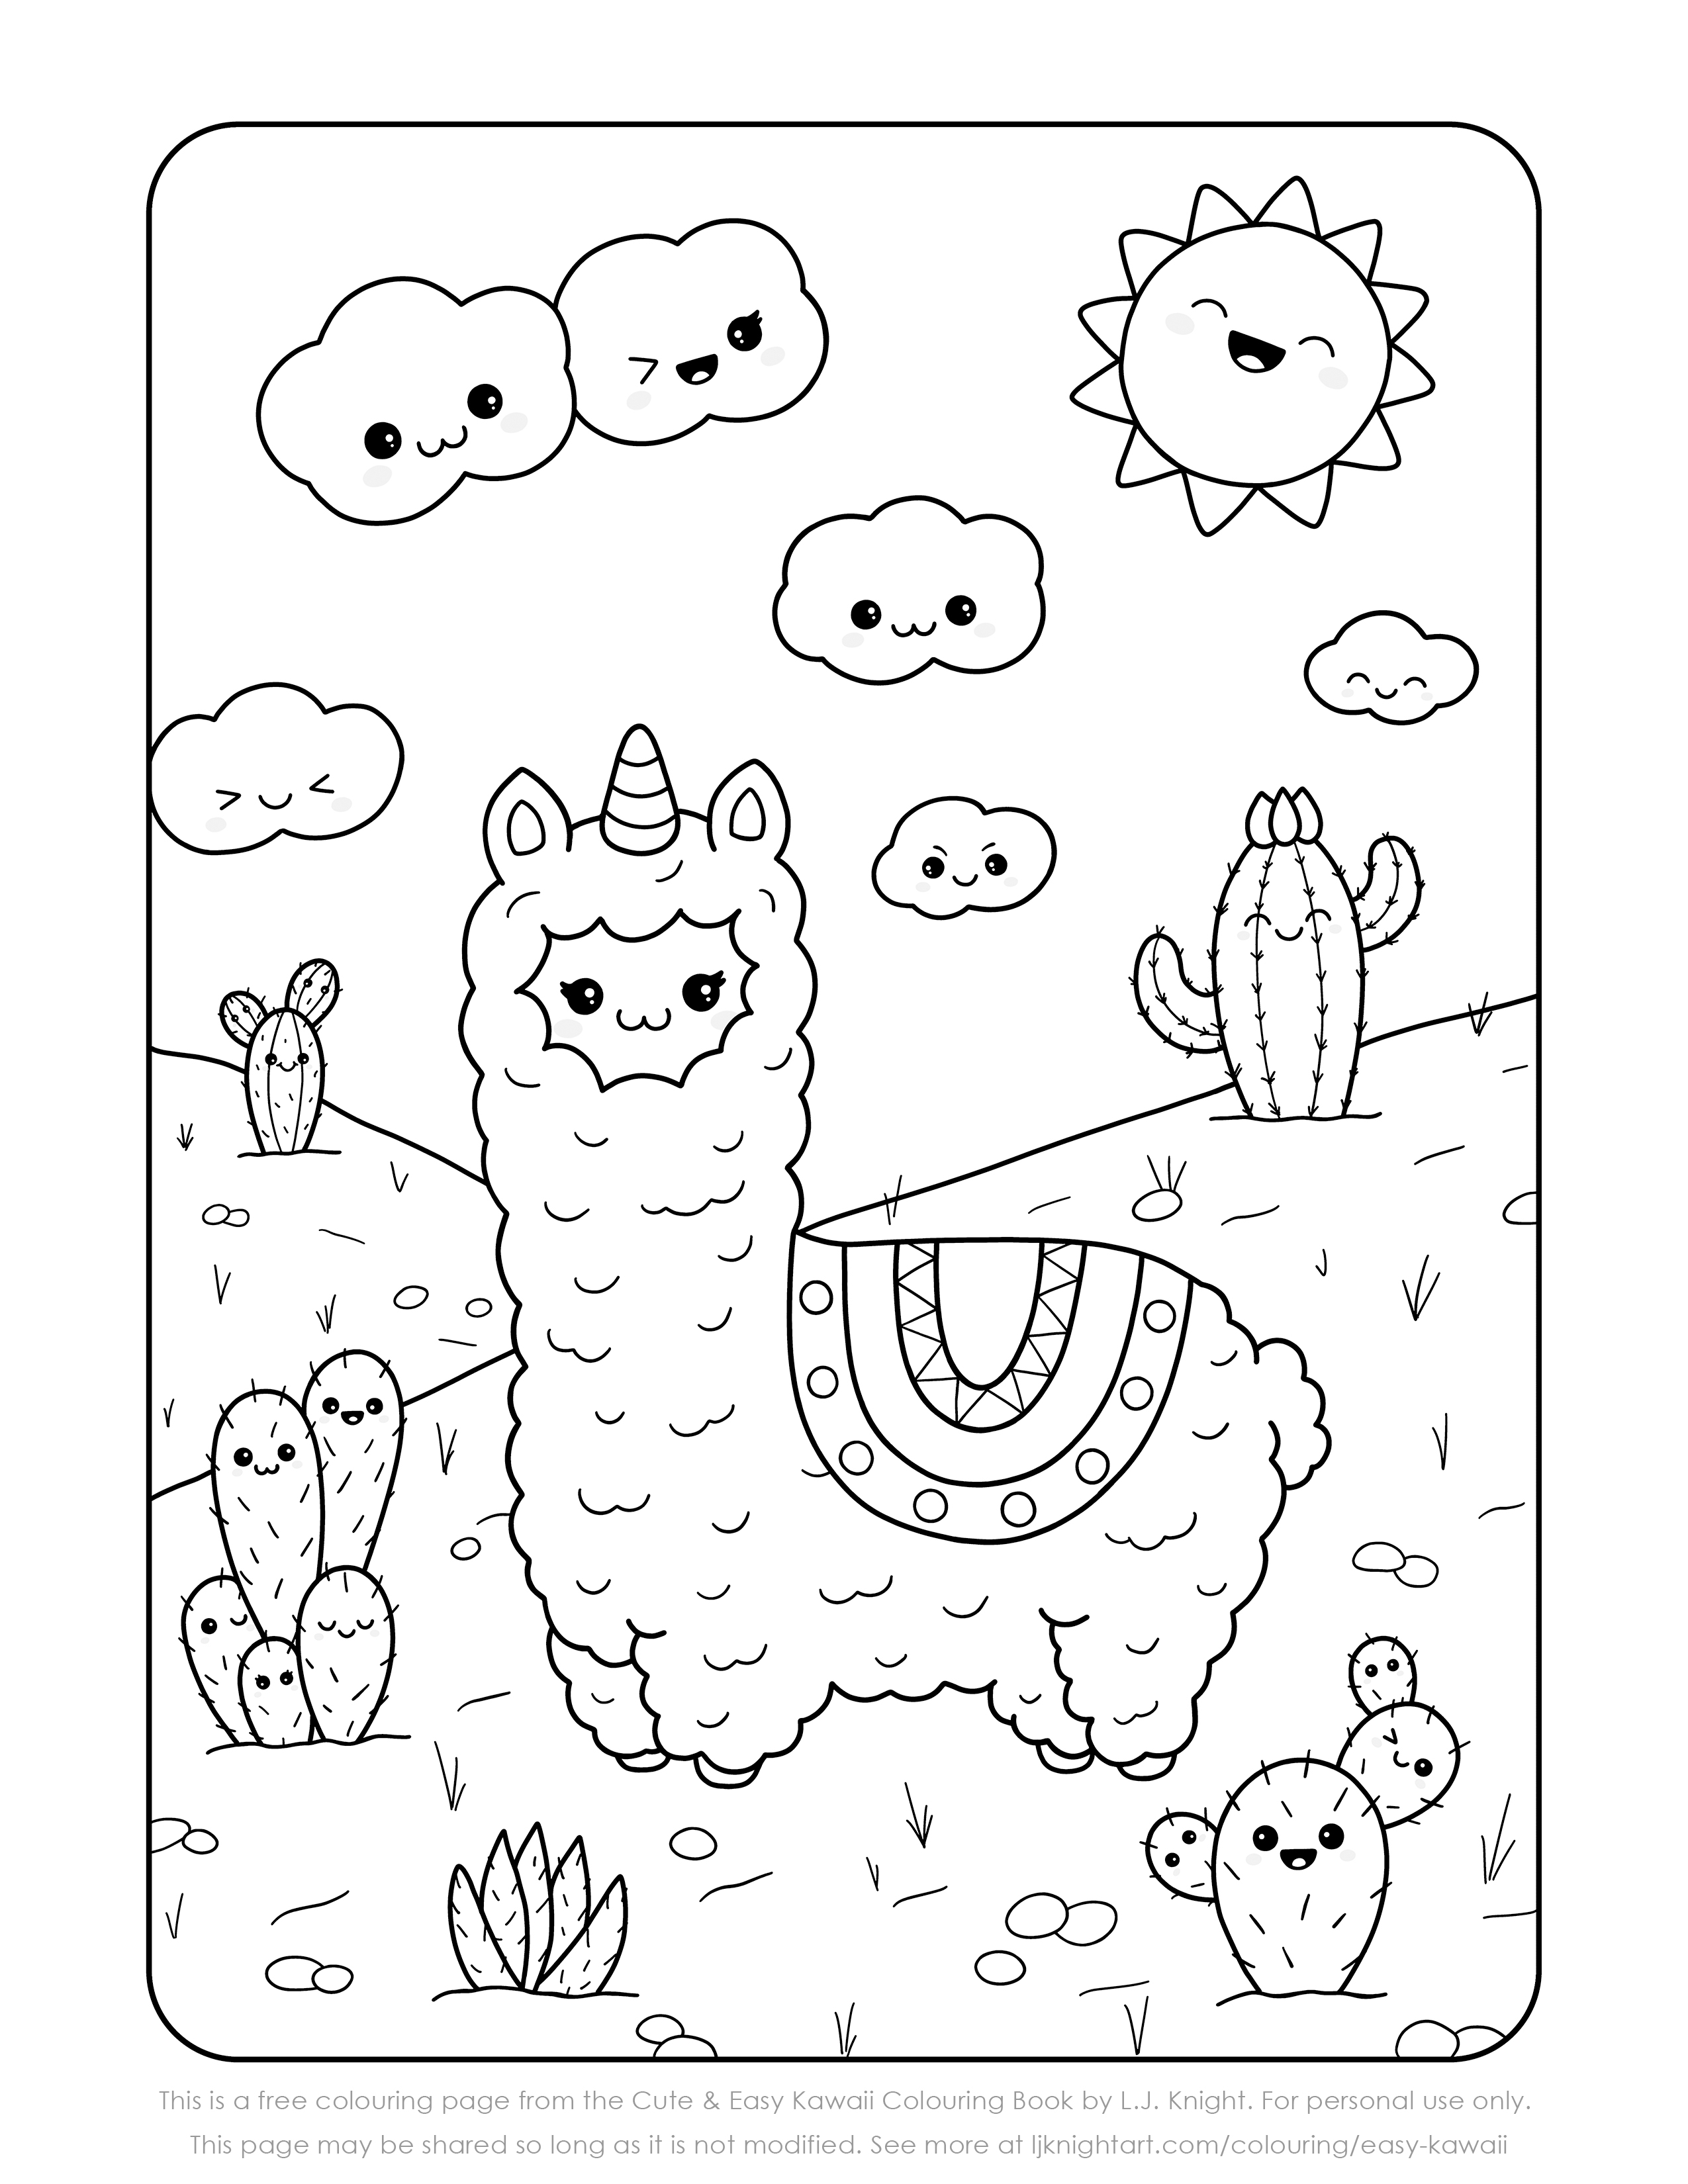 free full page coloring pages